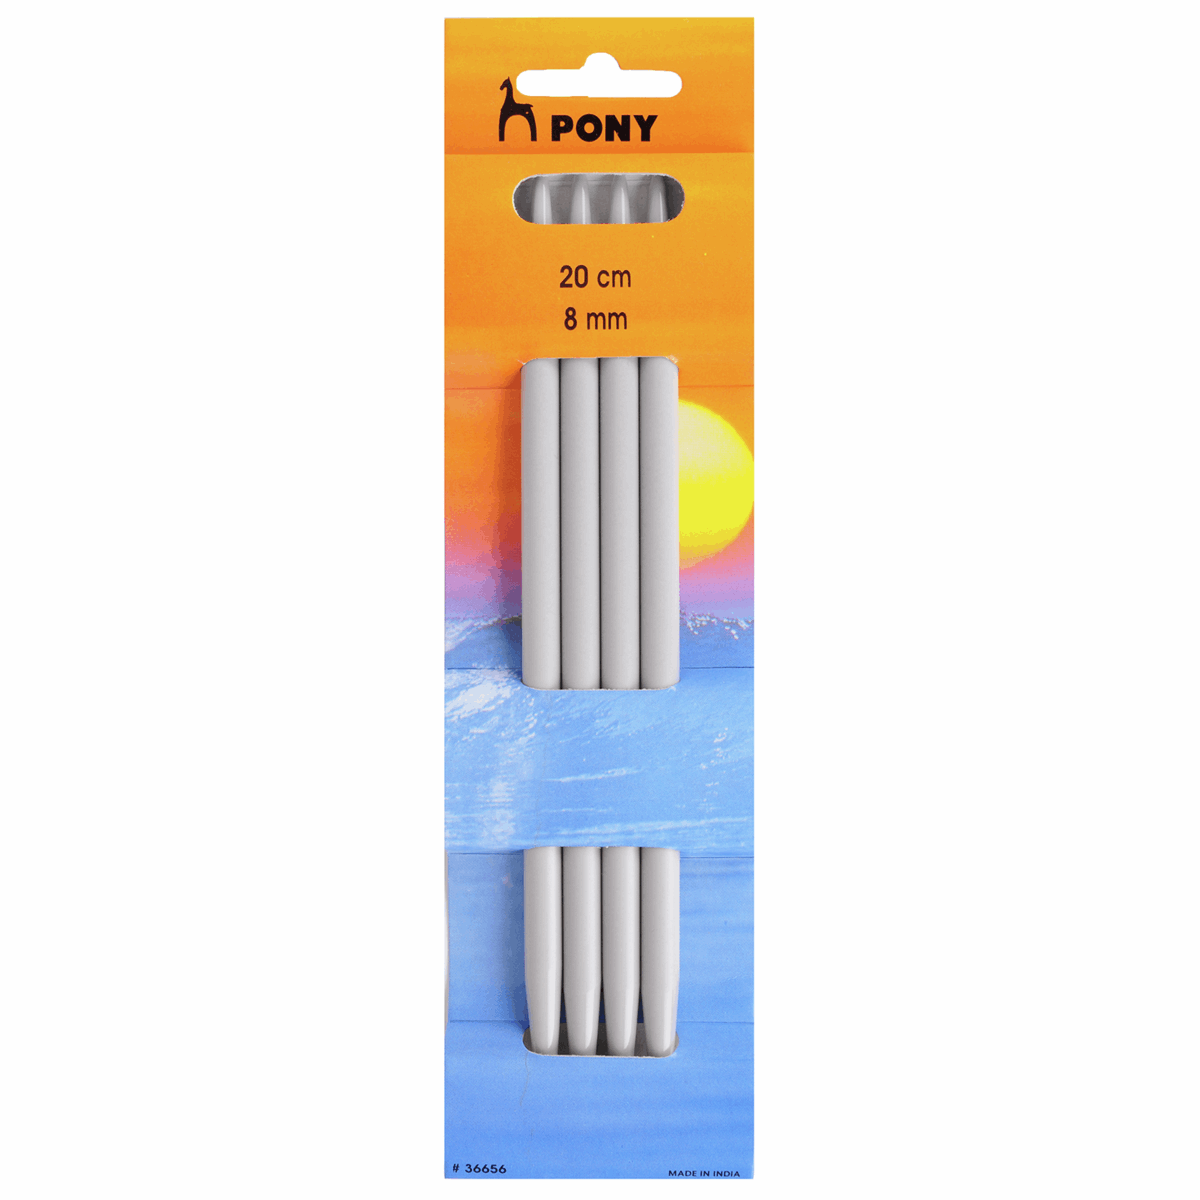 PONY Double-Ended Knitting Pins - 20cm x 8mm (Set of 4)